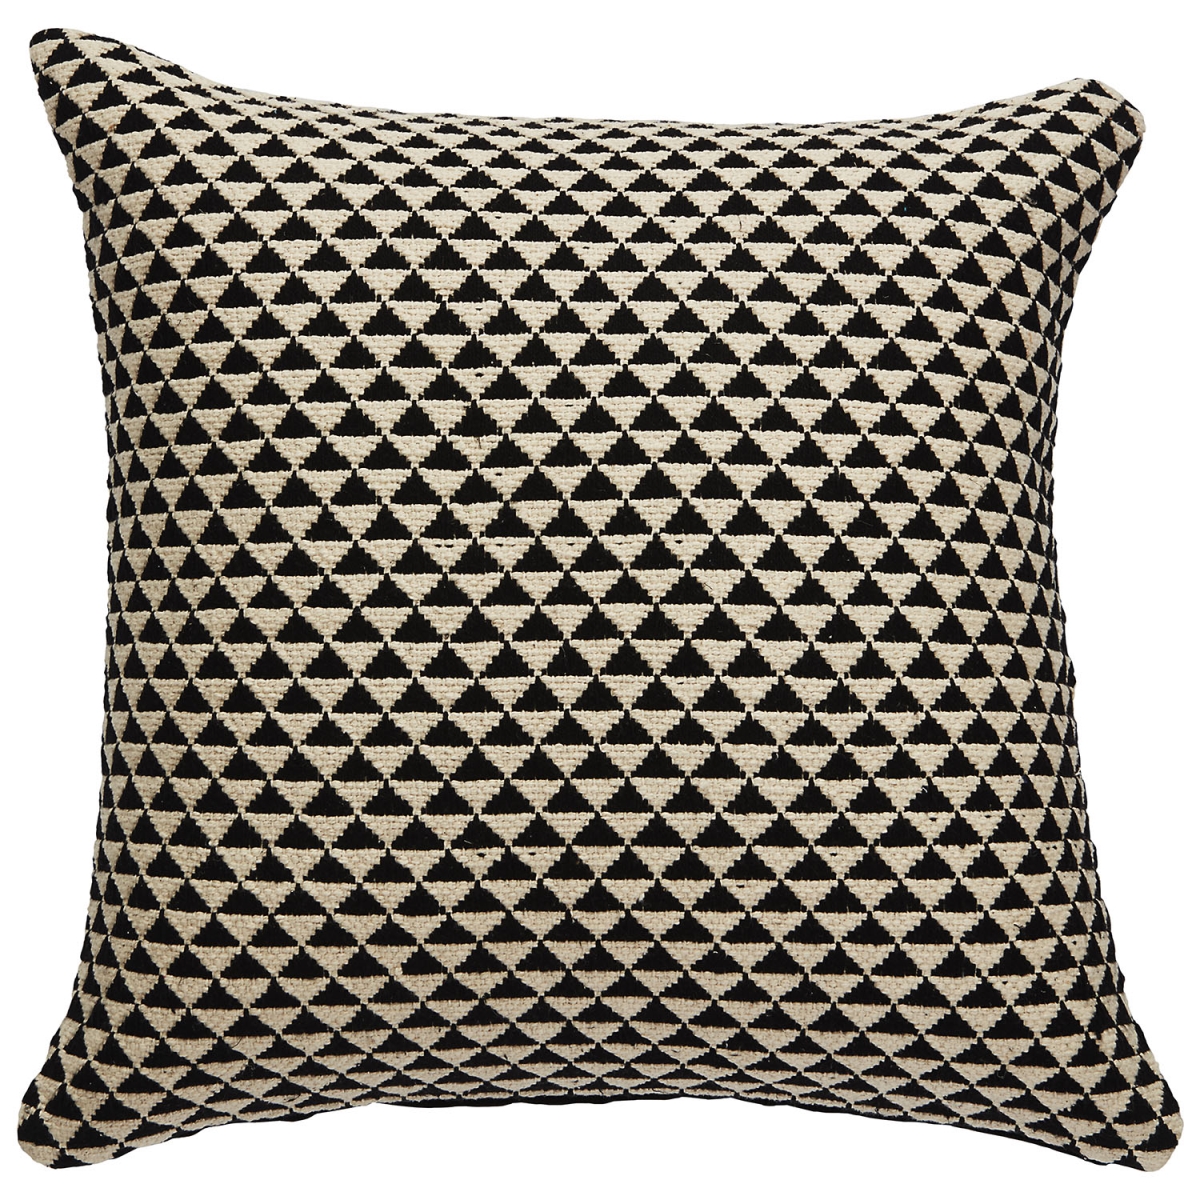 Plw102852 20 X 20 In. National Geographic Home Collection Karoo Black & Ivory Geometric Poly Throw Pillow